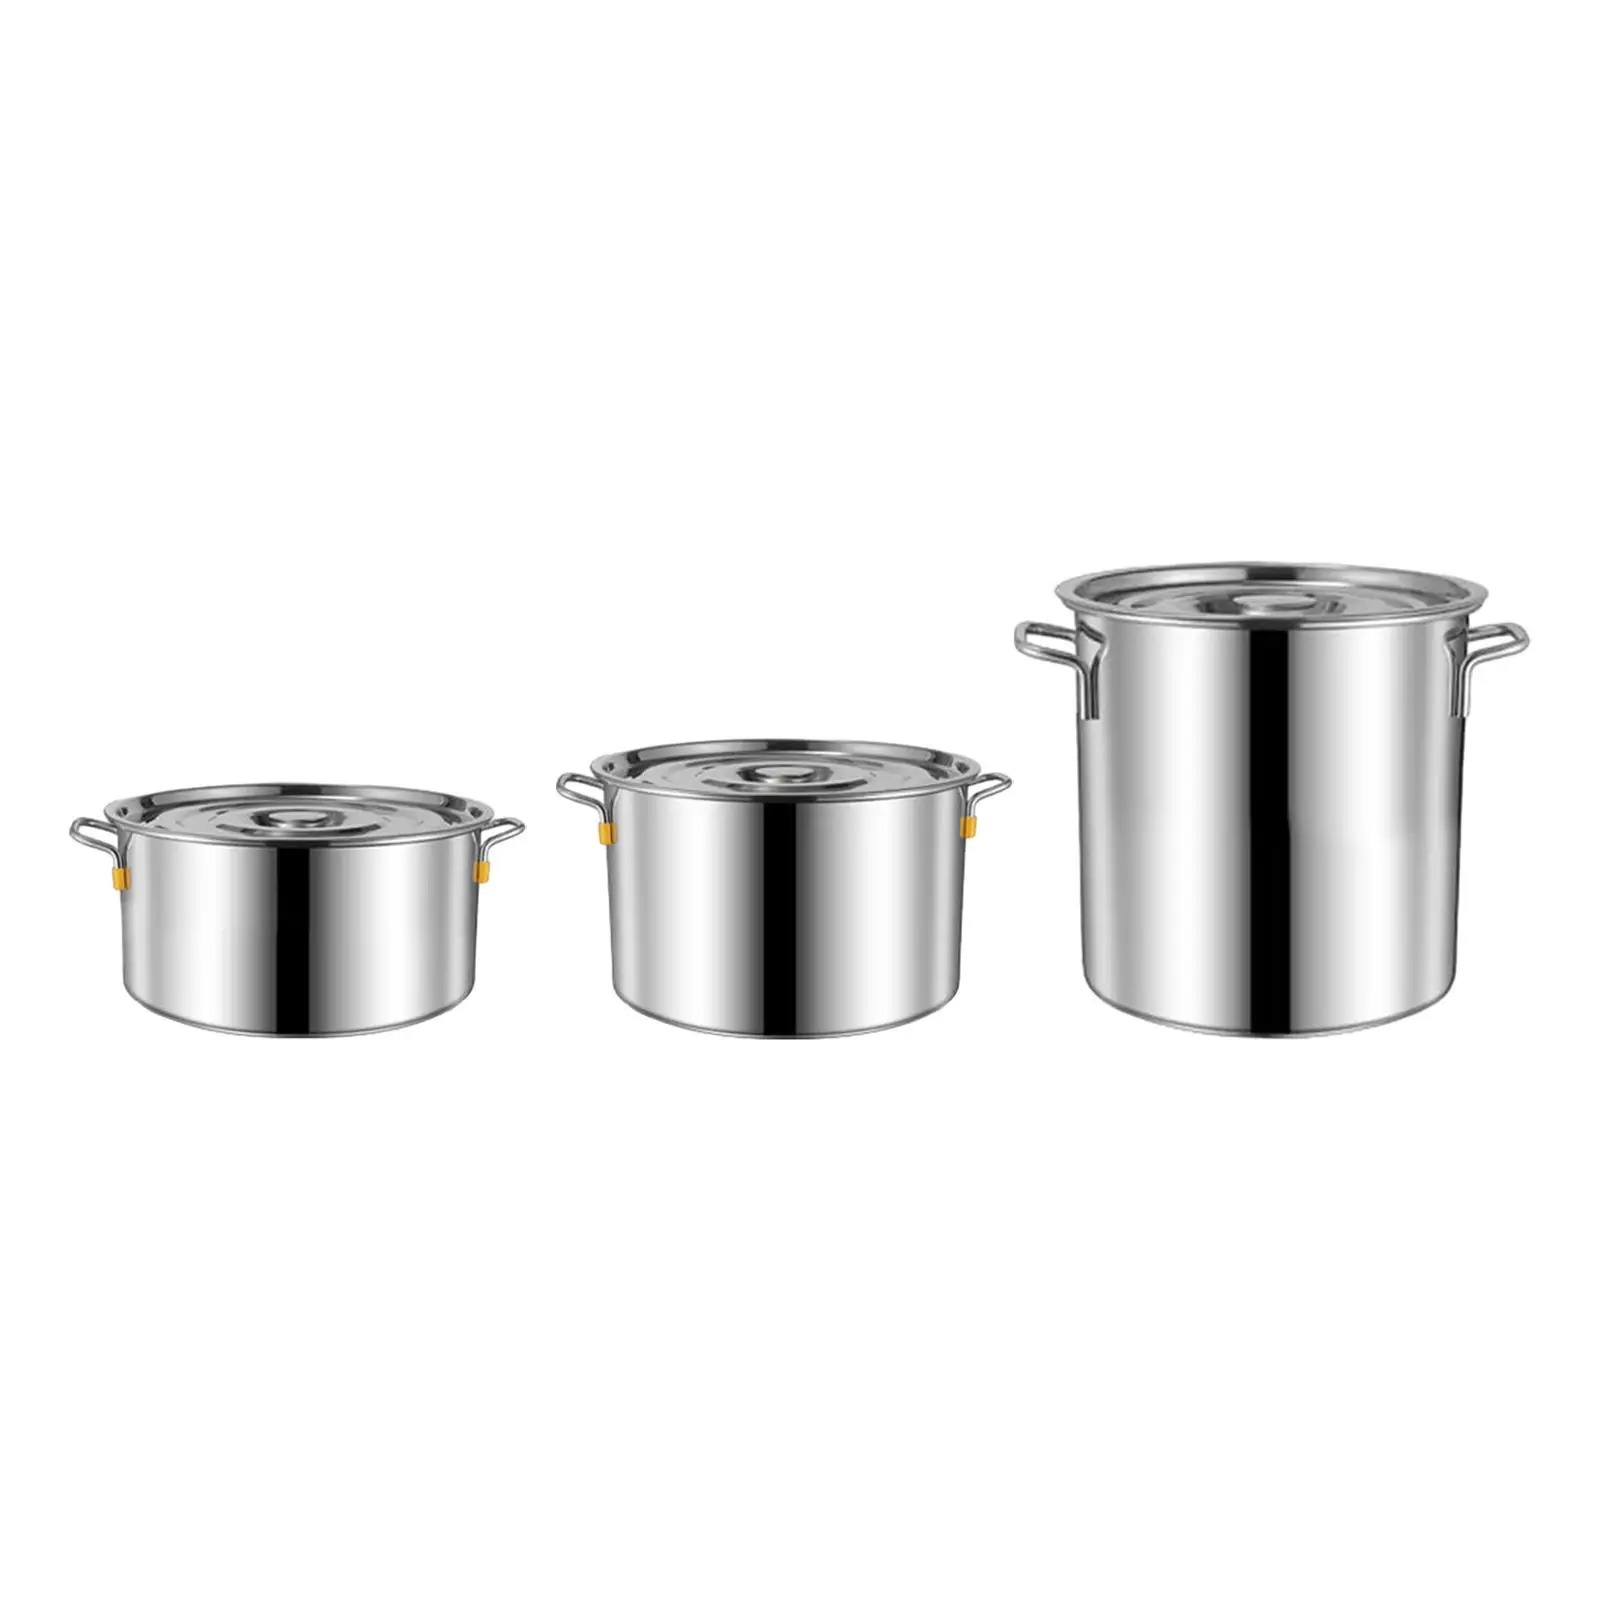 Stainless Steel Soup Pot Round Oil Bucket Large Wide Handles Mirror Polished